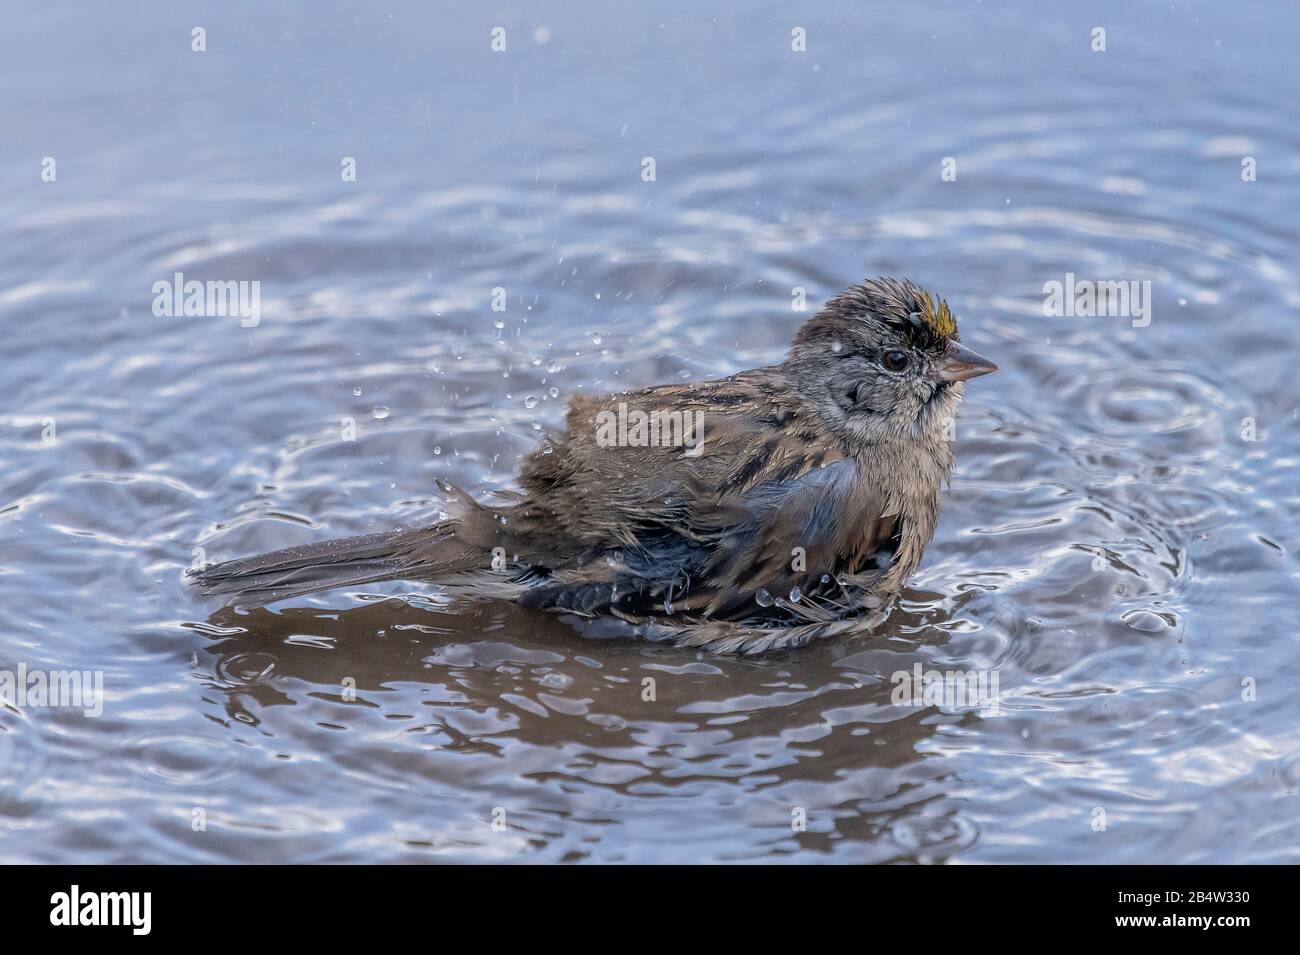 Golden-crowned sparrow, Zonotrichia atricapilla, bathing and preening in shallow puddle, Point Lobos, California. Stock Photo